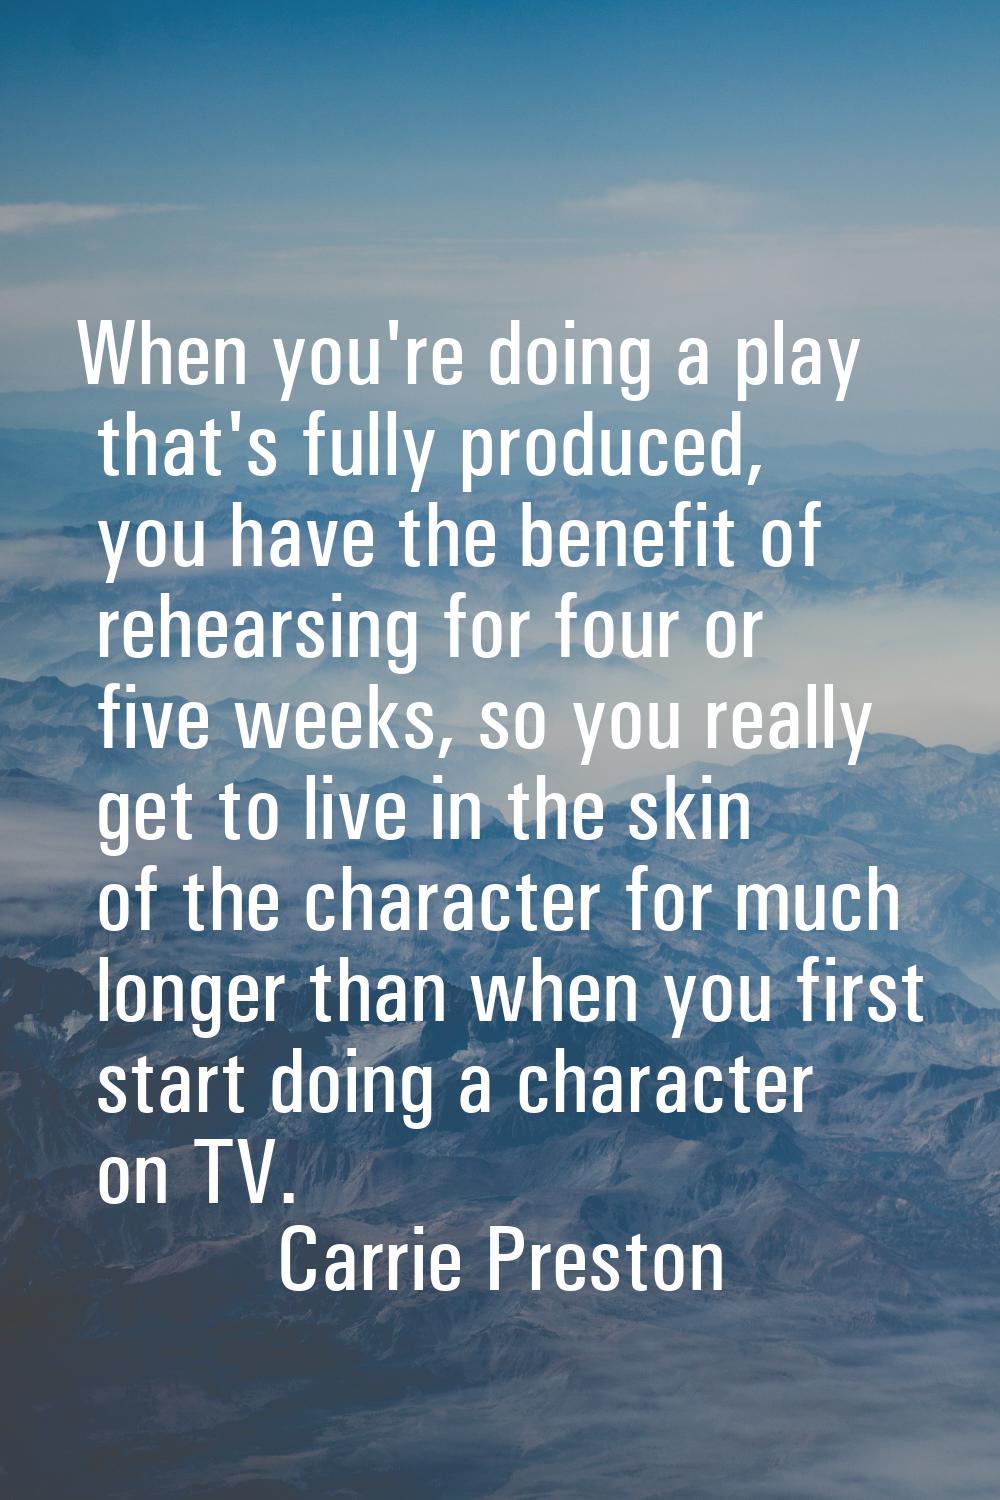 When you're doing a play that's fully produced, you have the benefit of rehearsing for four or five